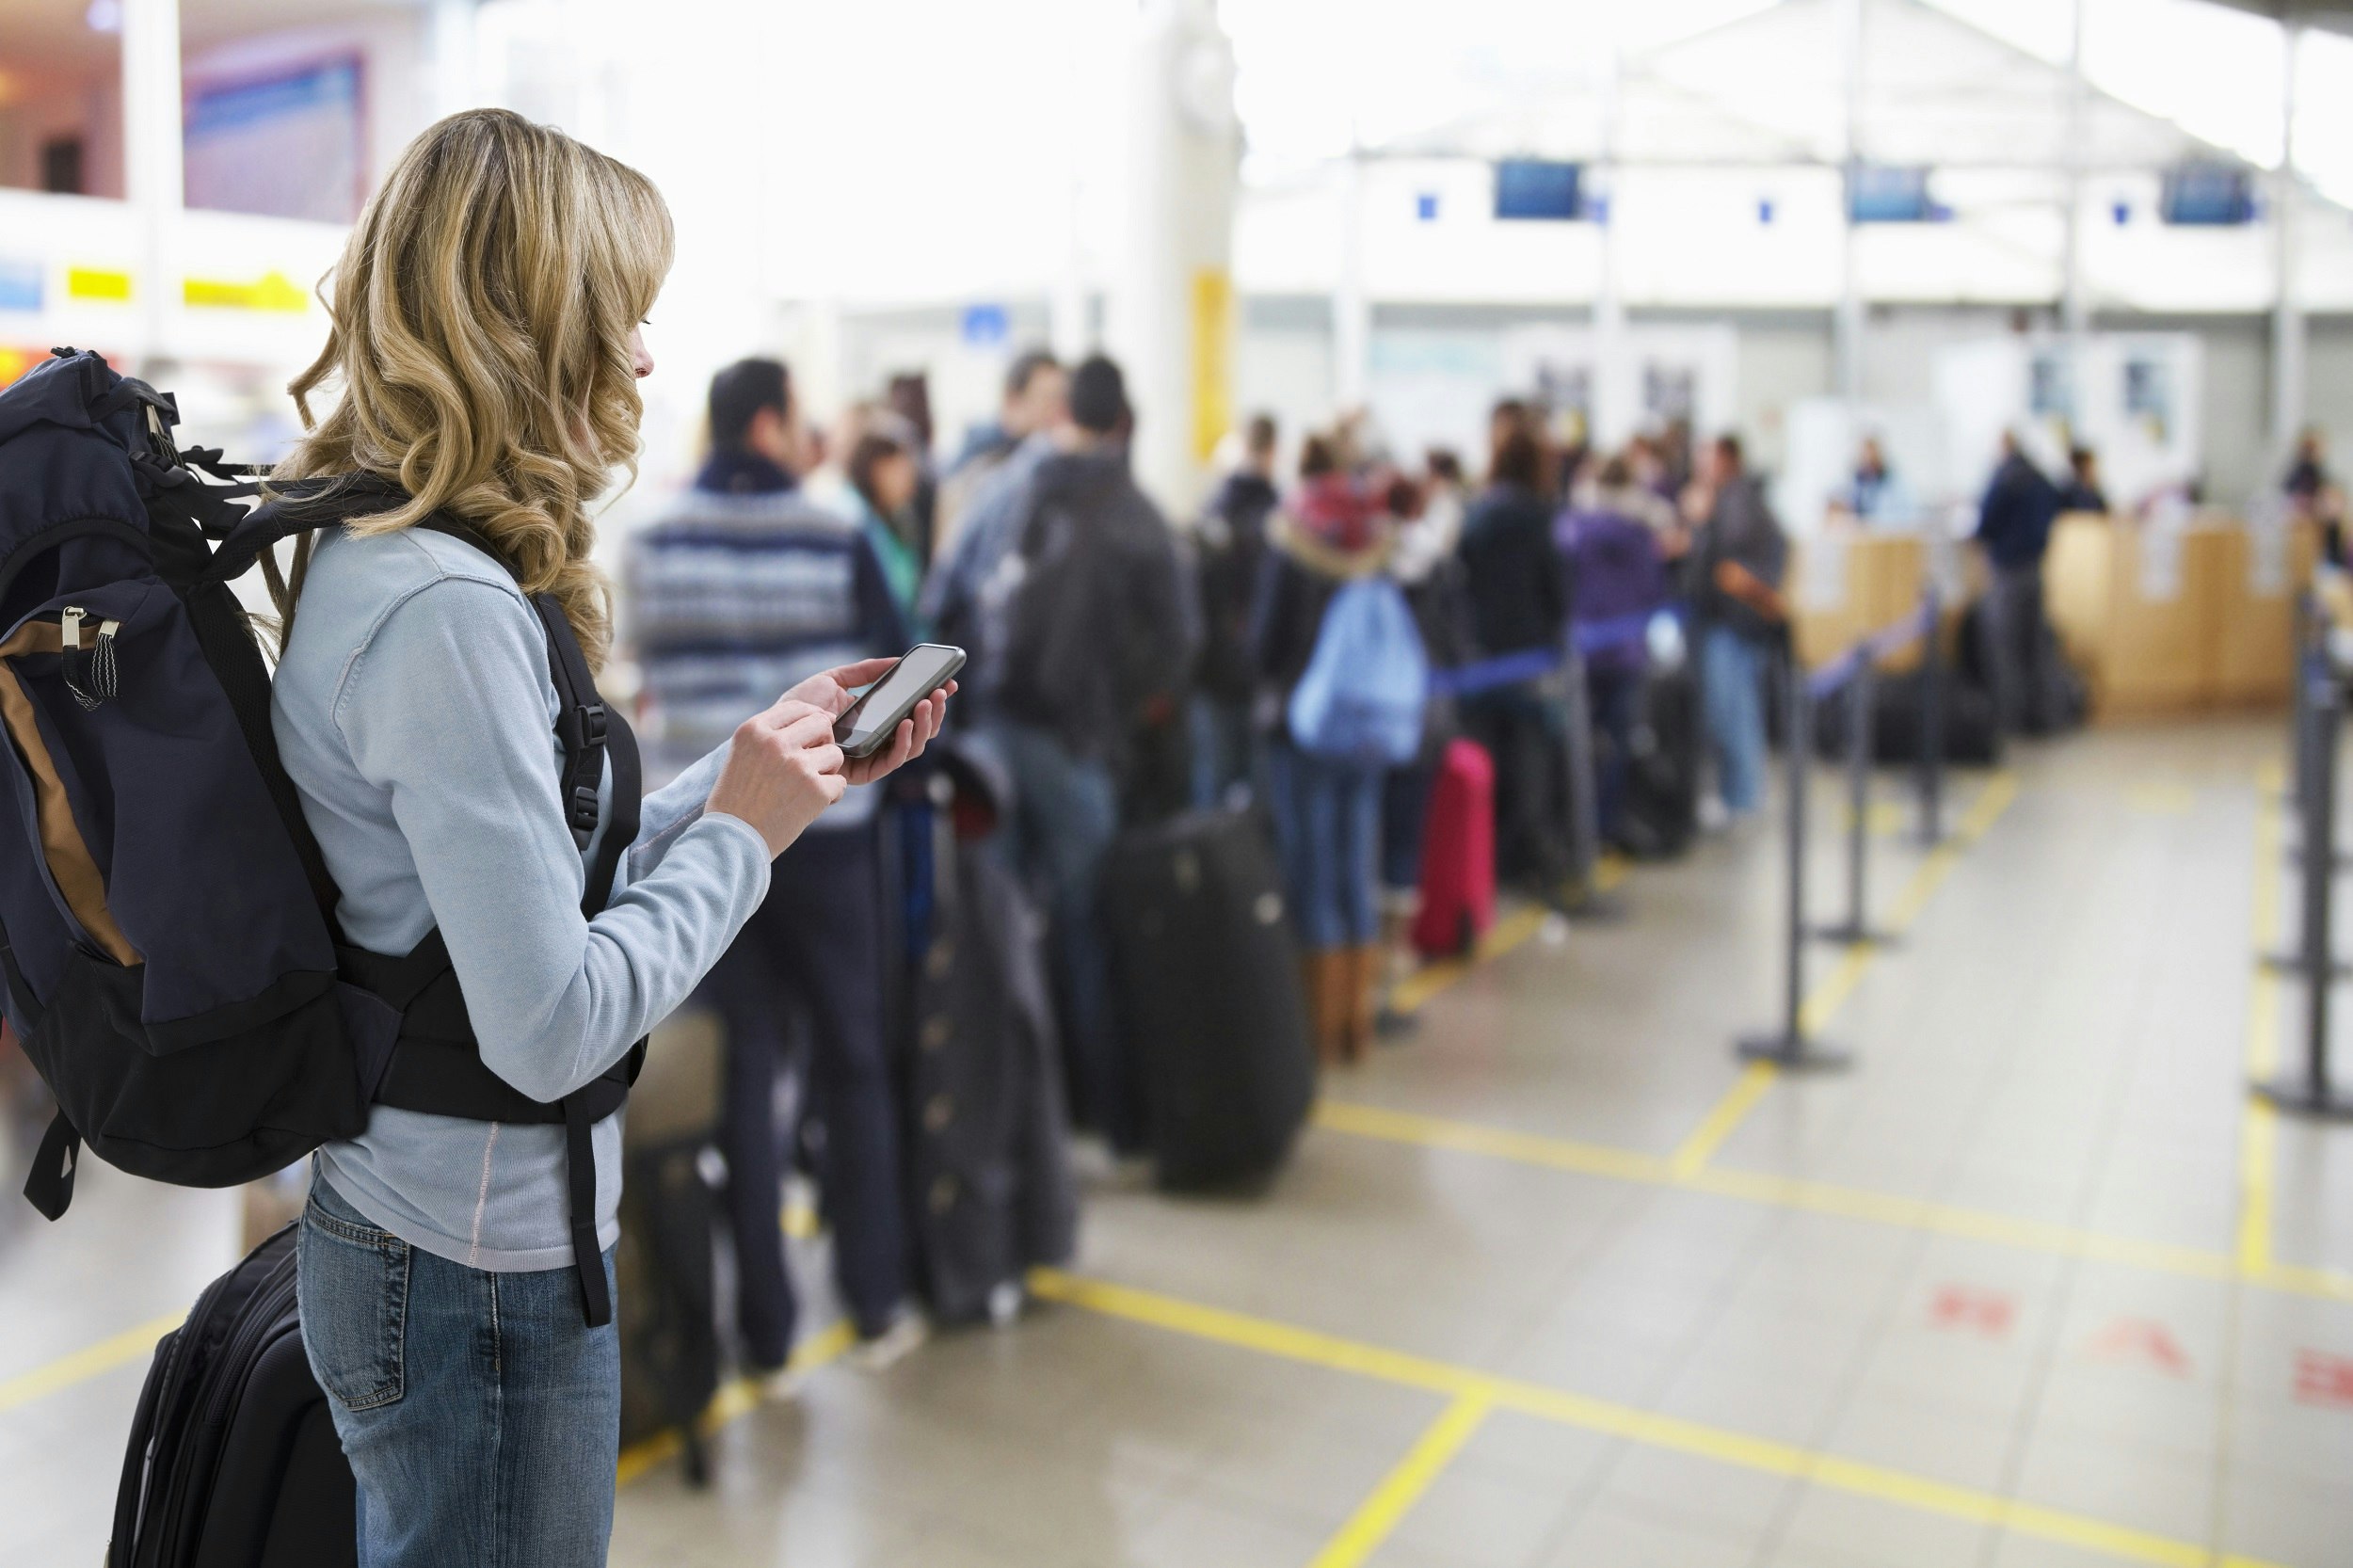 A woman wearing a backpack looks at her phone while she waits in a queue to board a plane